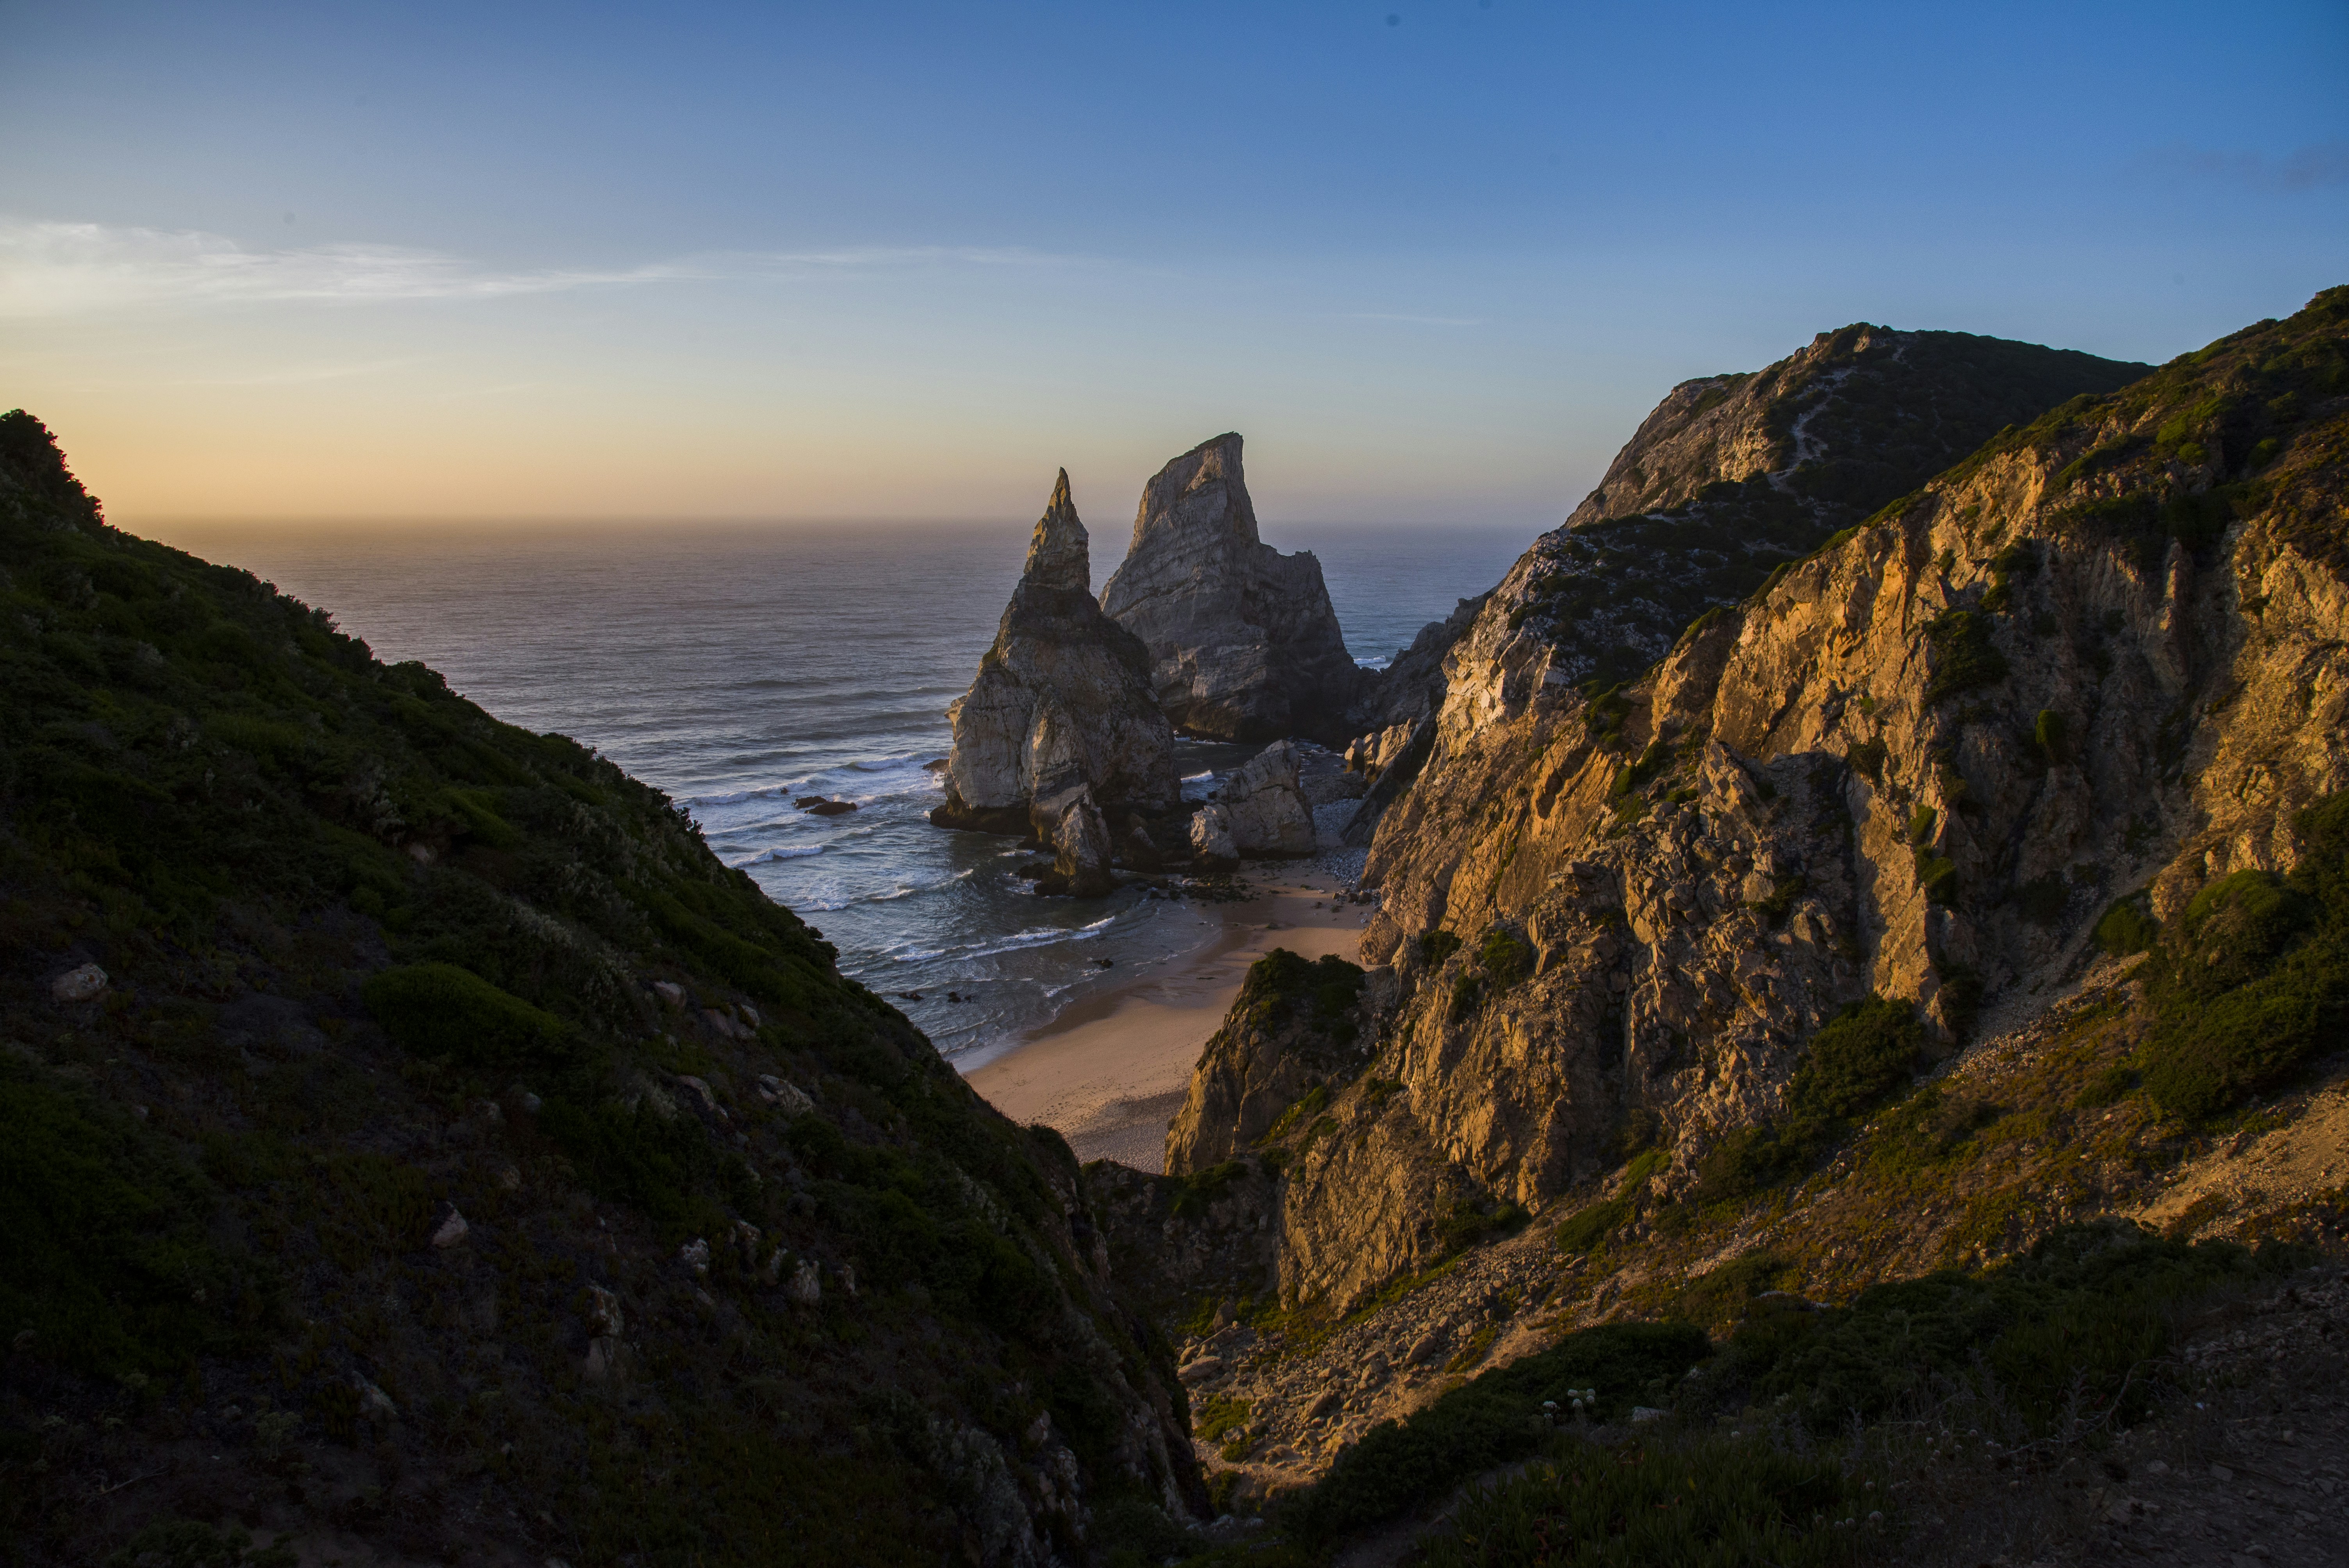 Drove for about an hour just to caught this light at Praia da Ursa, located near Europe's westernmost point.